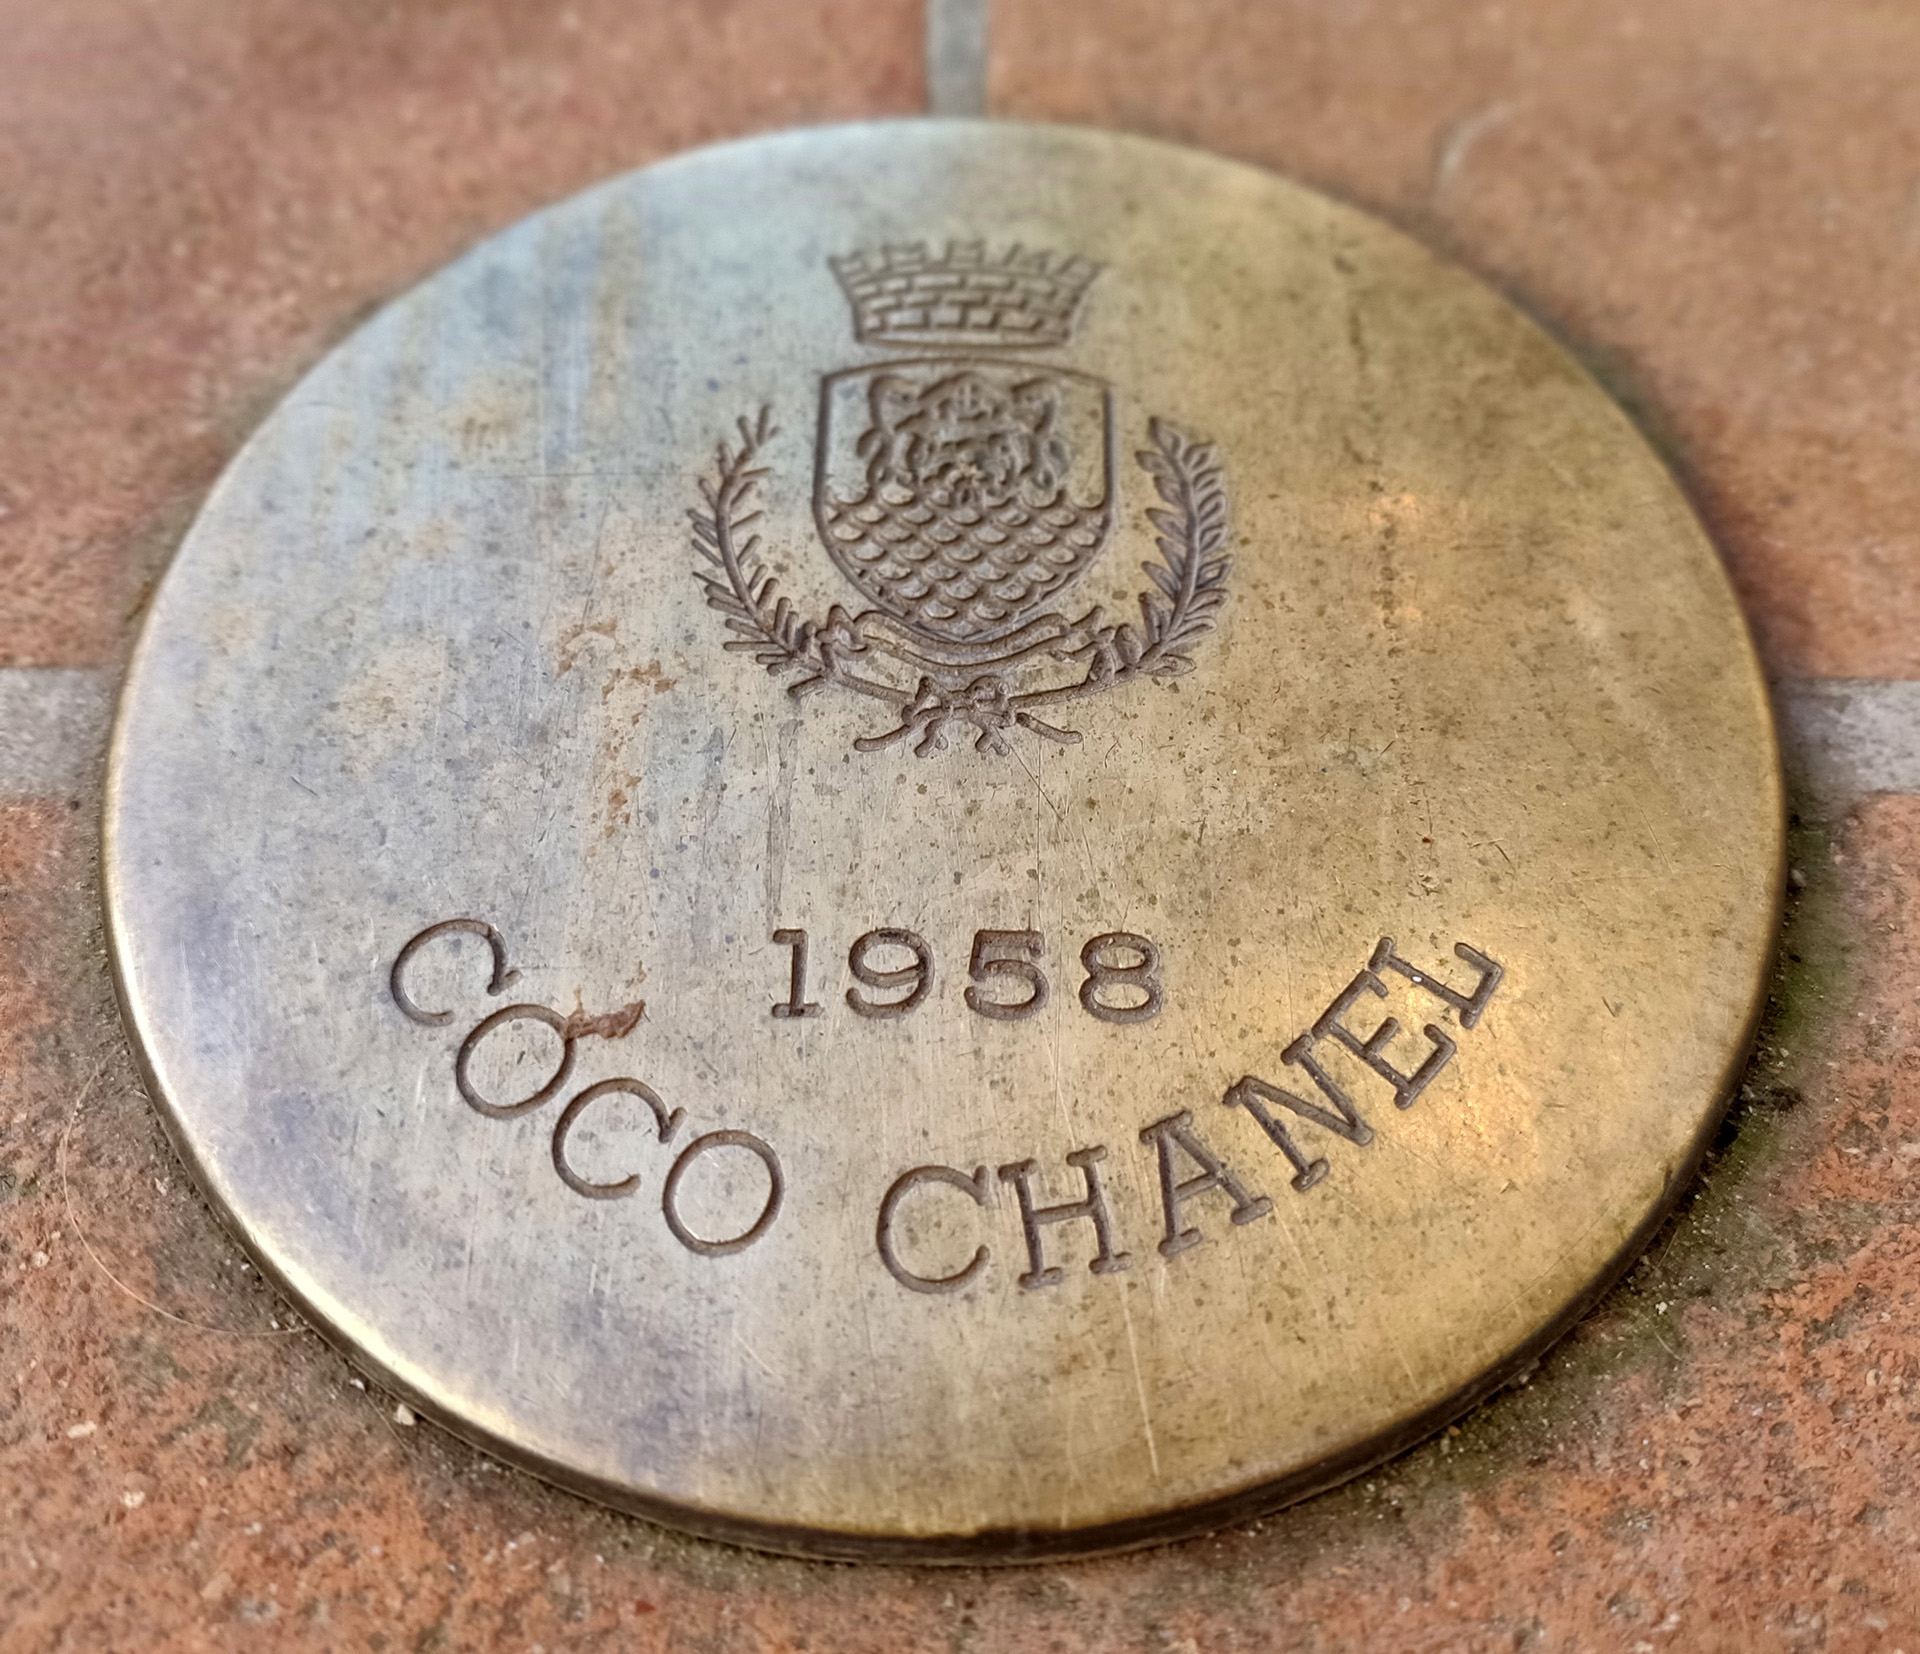 Plate dedicated to Coco Chanel